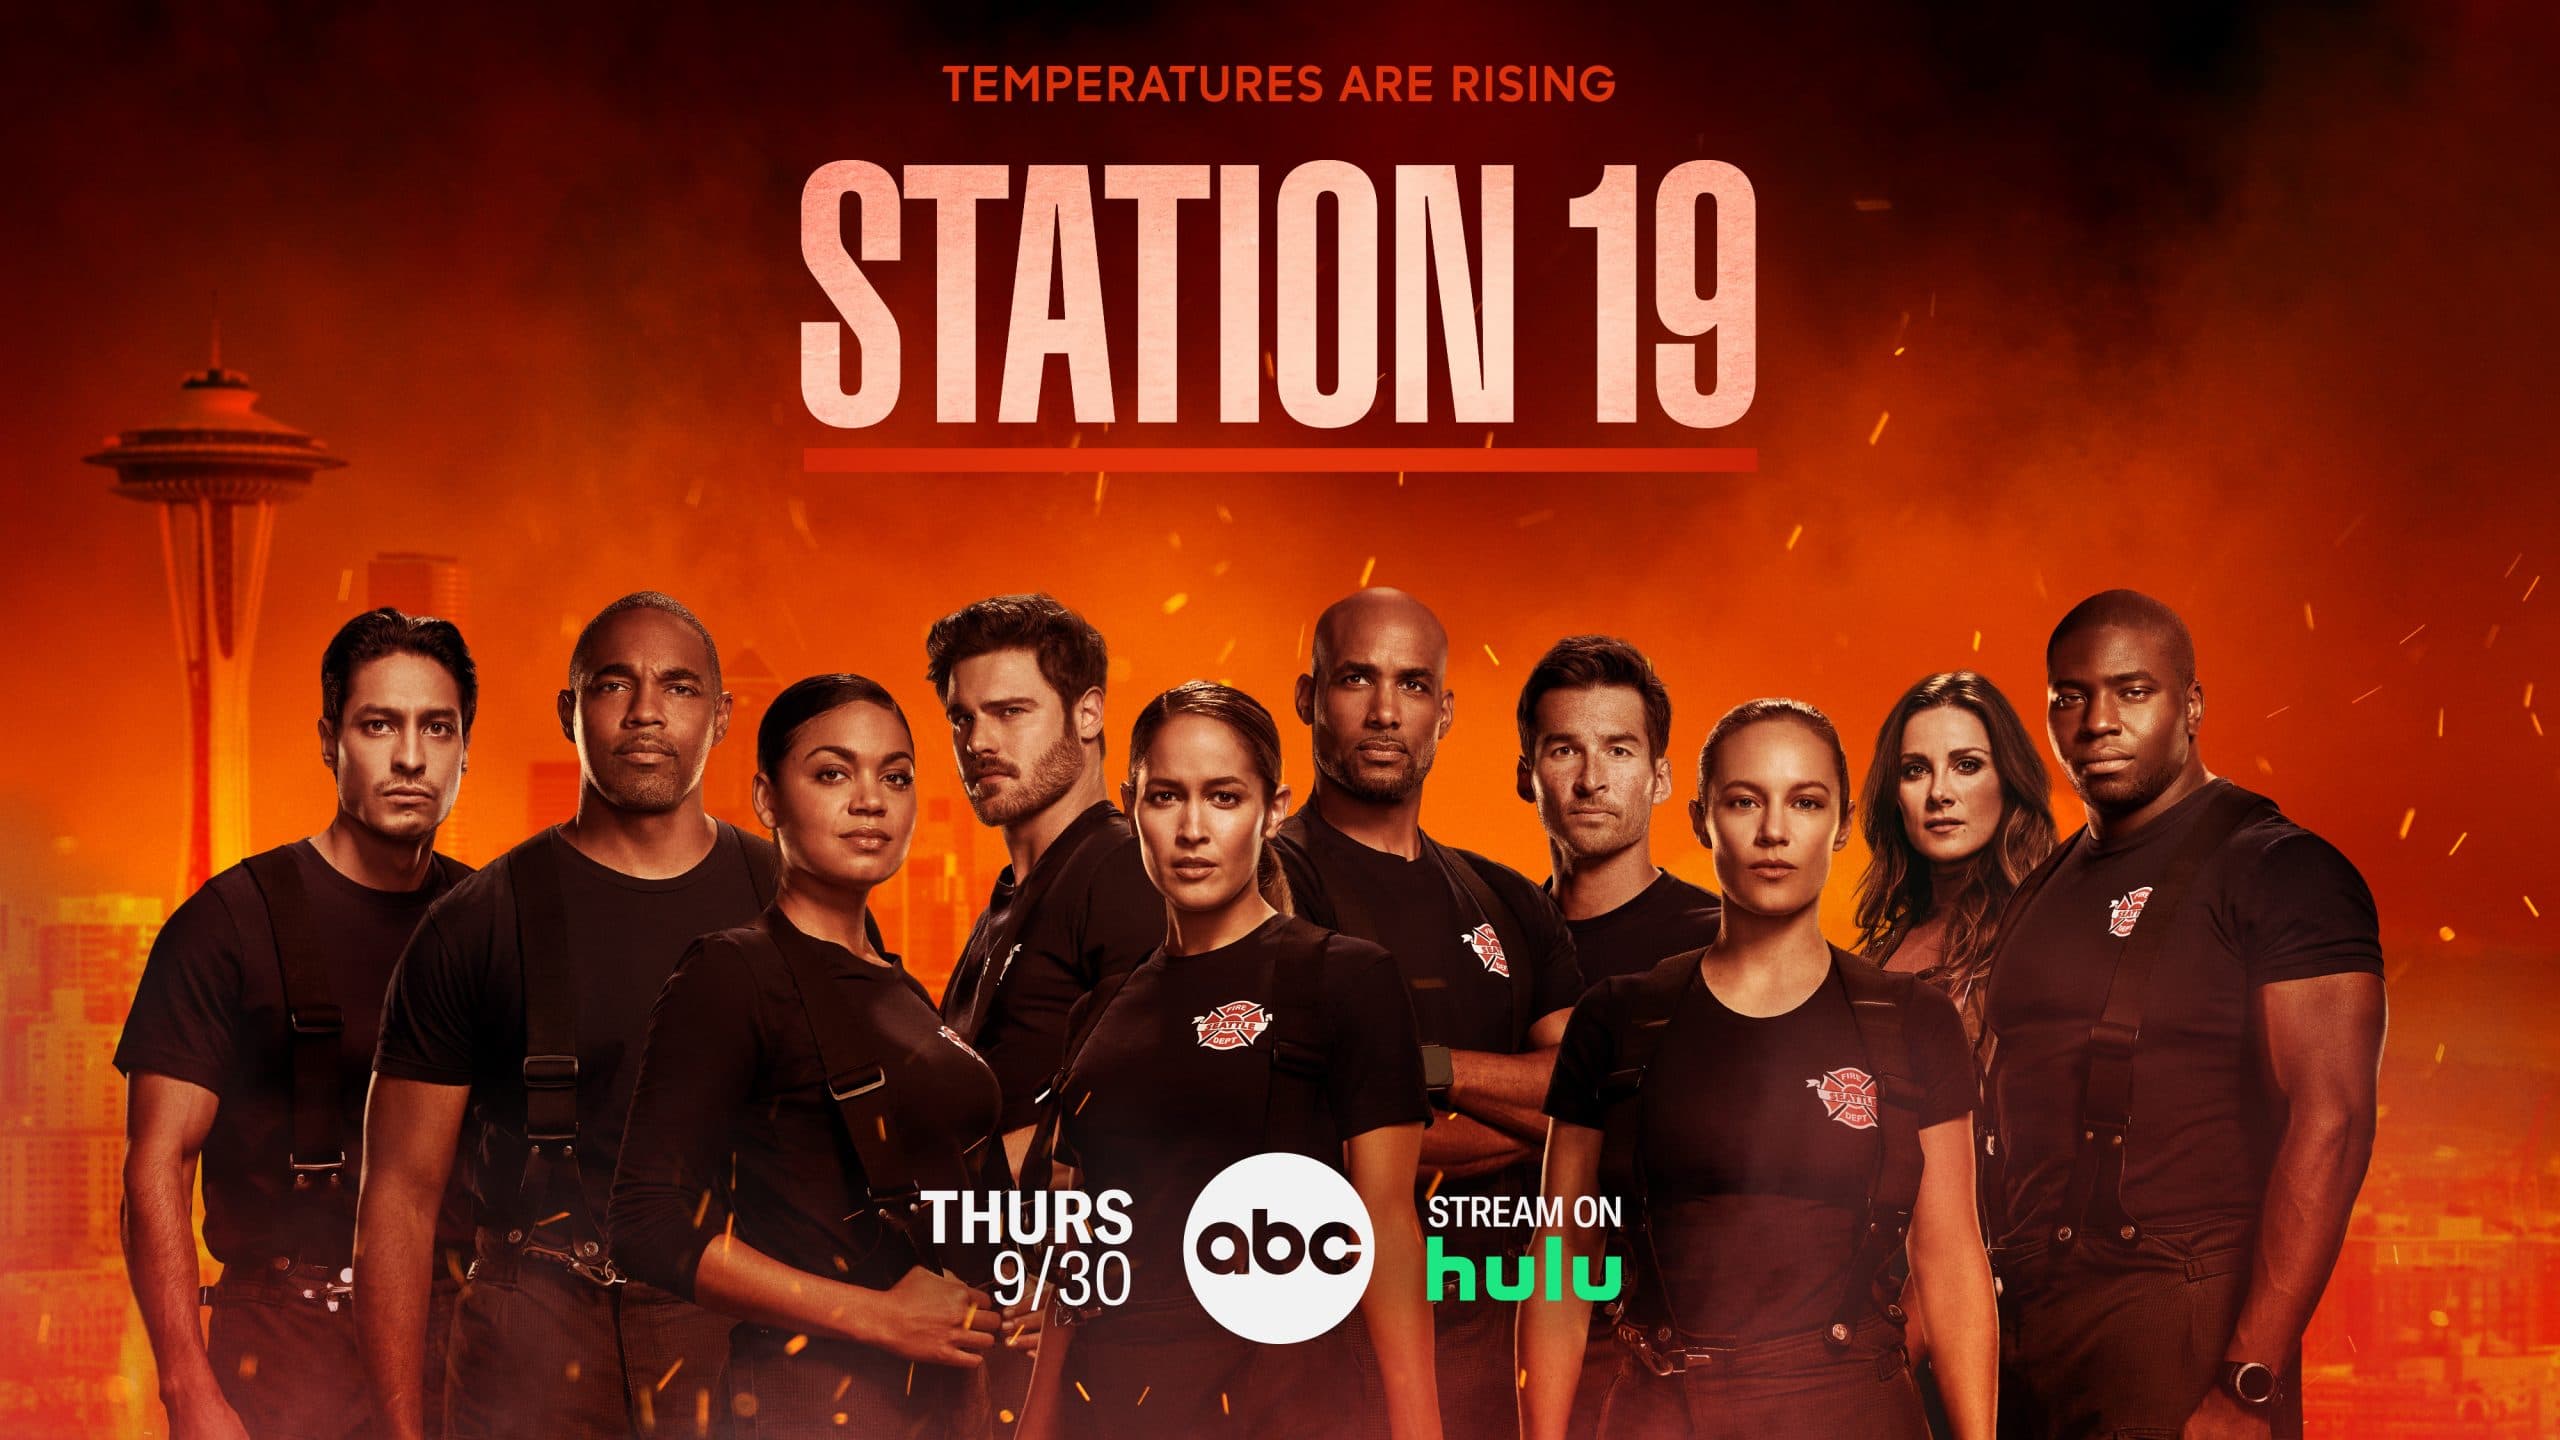 'Station 19' Season 5 Release Date, What To Expect